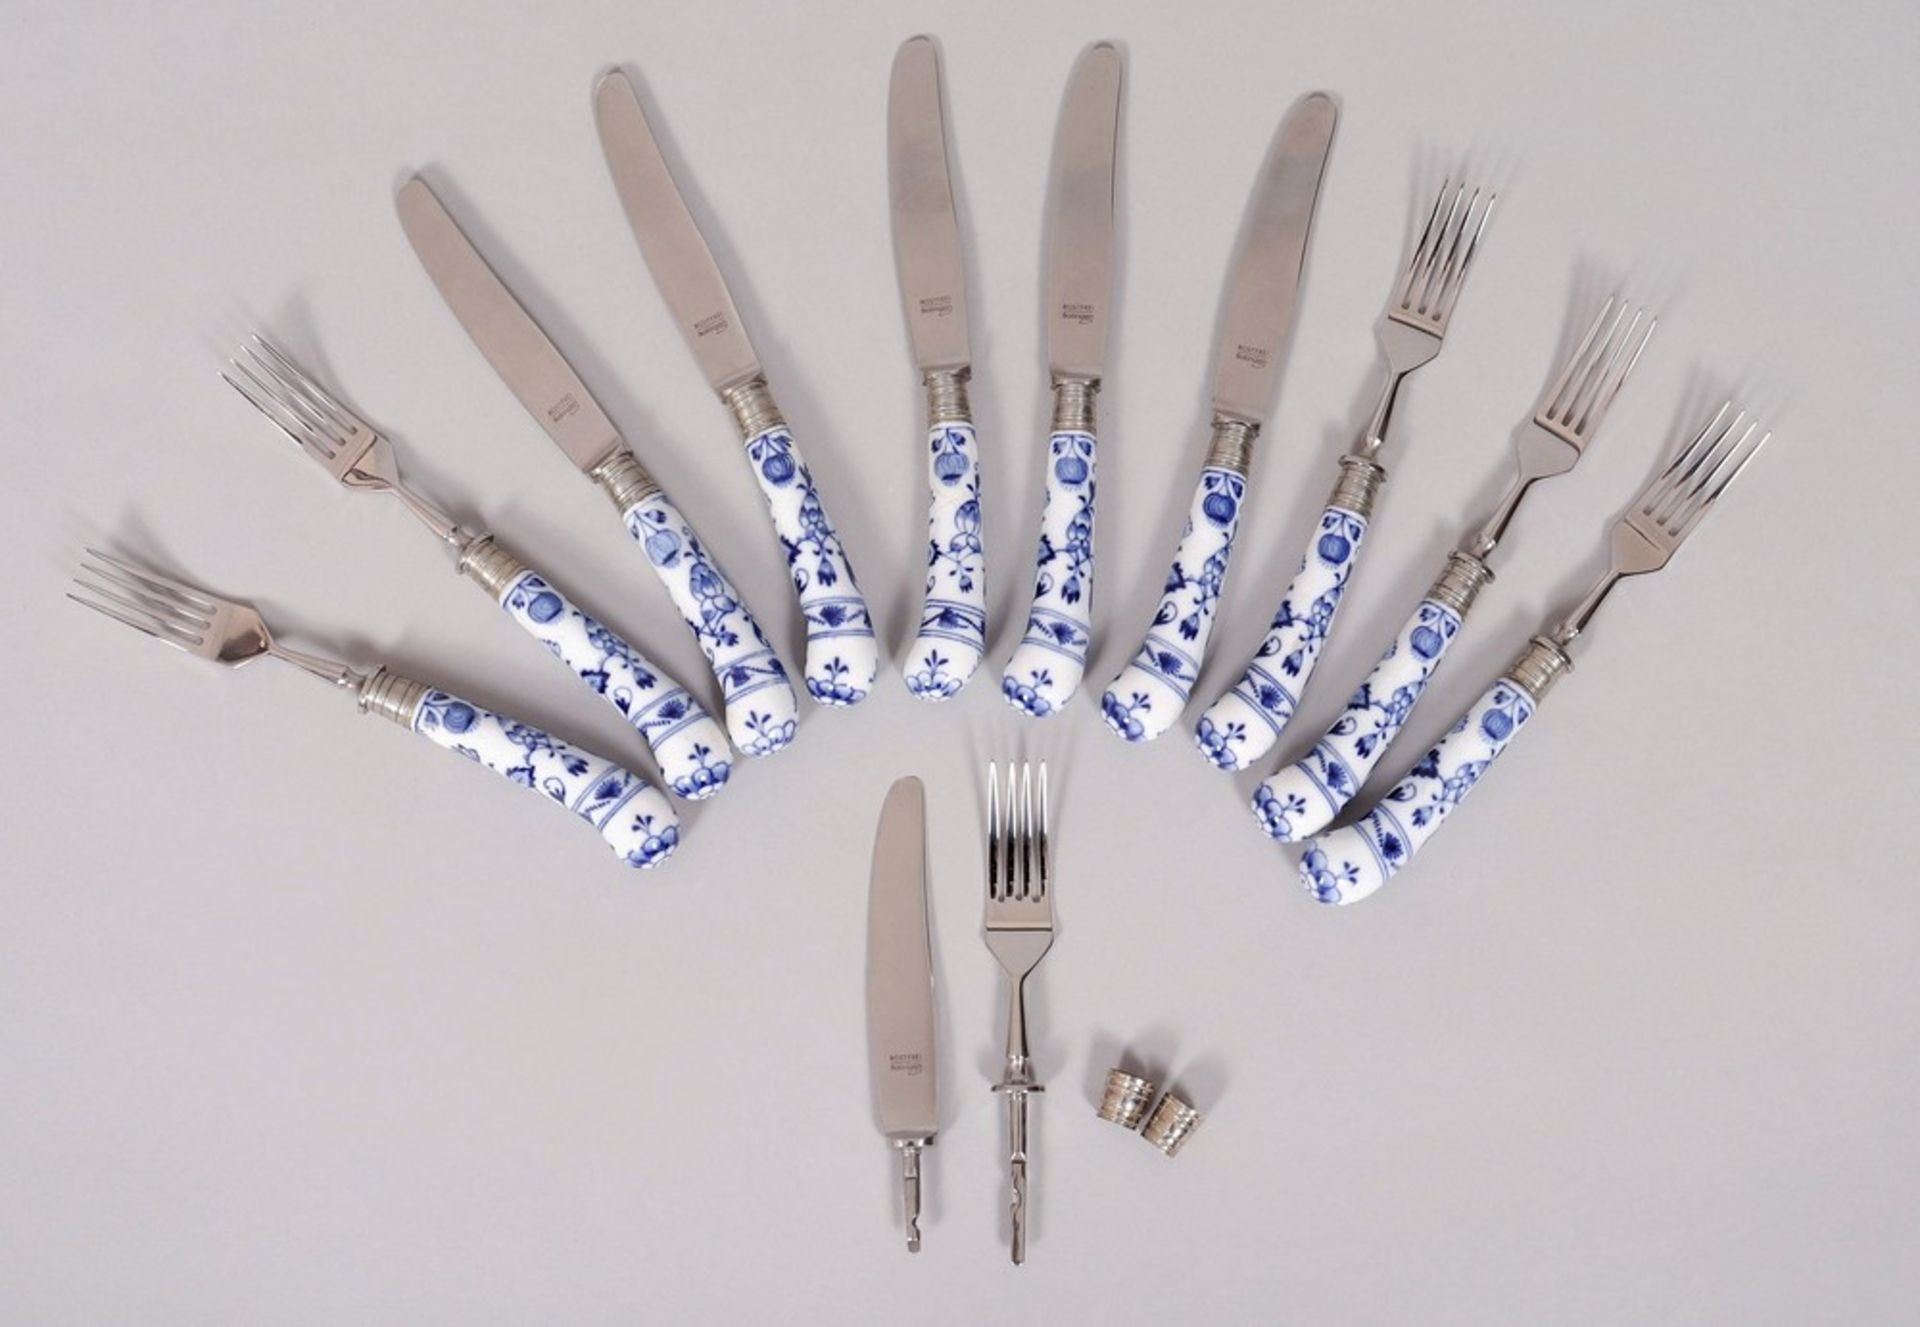 Part cutlery set, Meissen and others, "Zwiebelmuster" decor, Knauf period (c. 1900)porcelain/steel, - Image 4 of 4